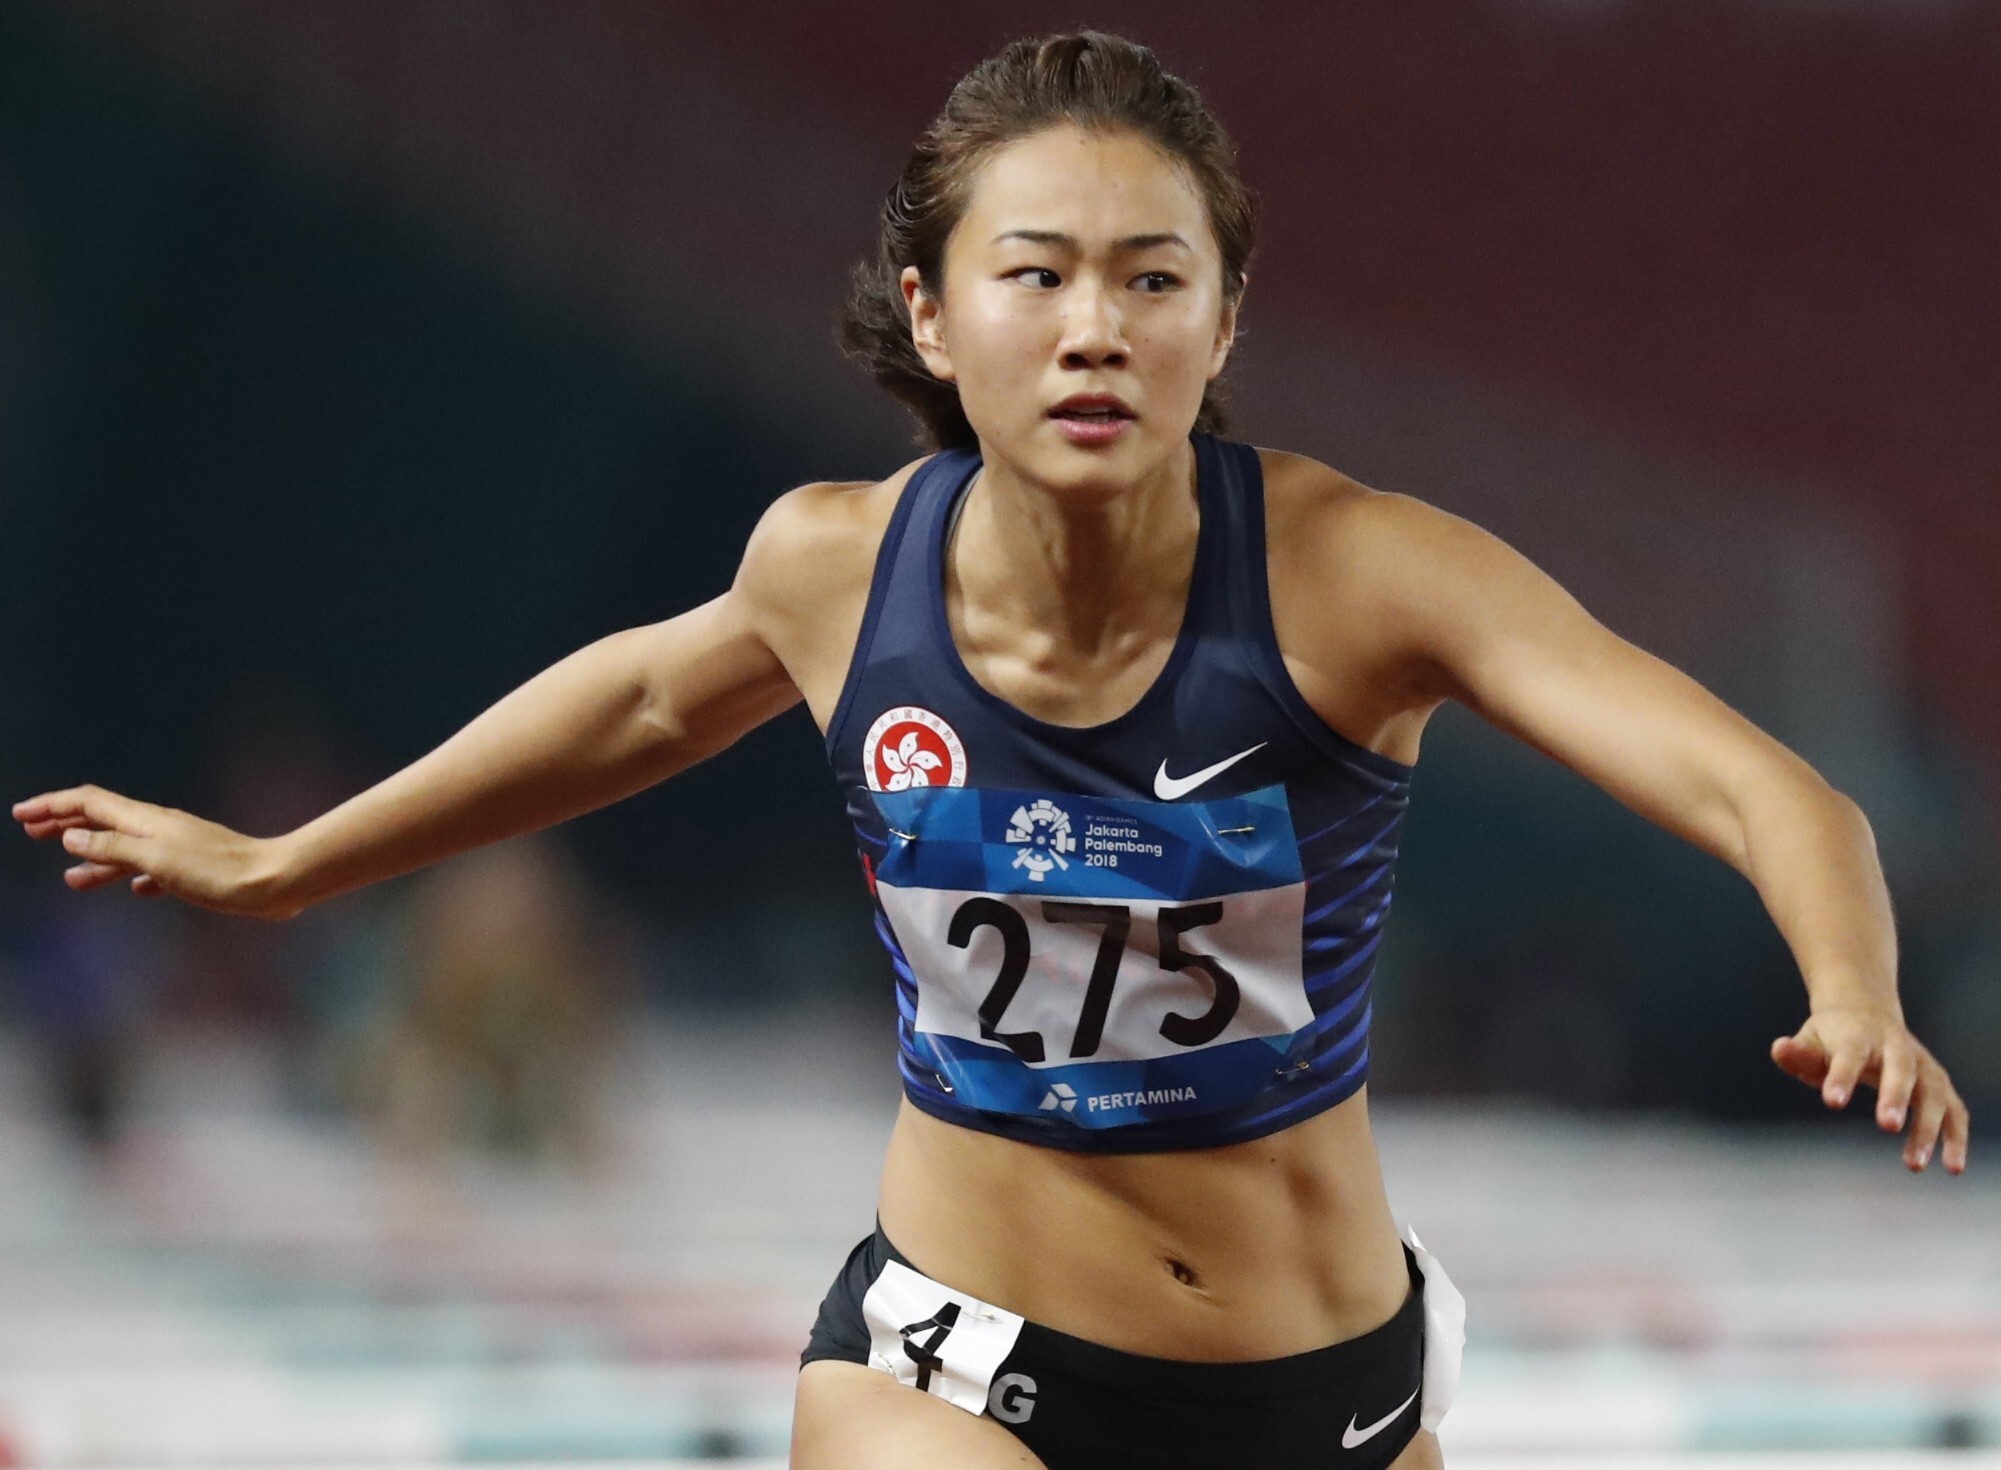 Hurdler Vera Lui is aiming to secure a ticket to the Tokyo Olympics. Photo: Reuters